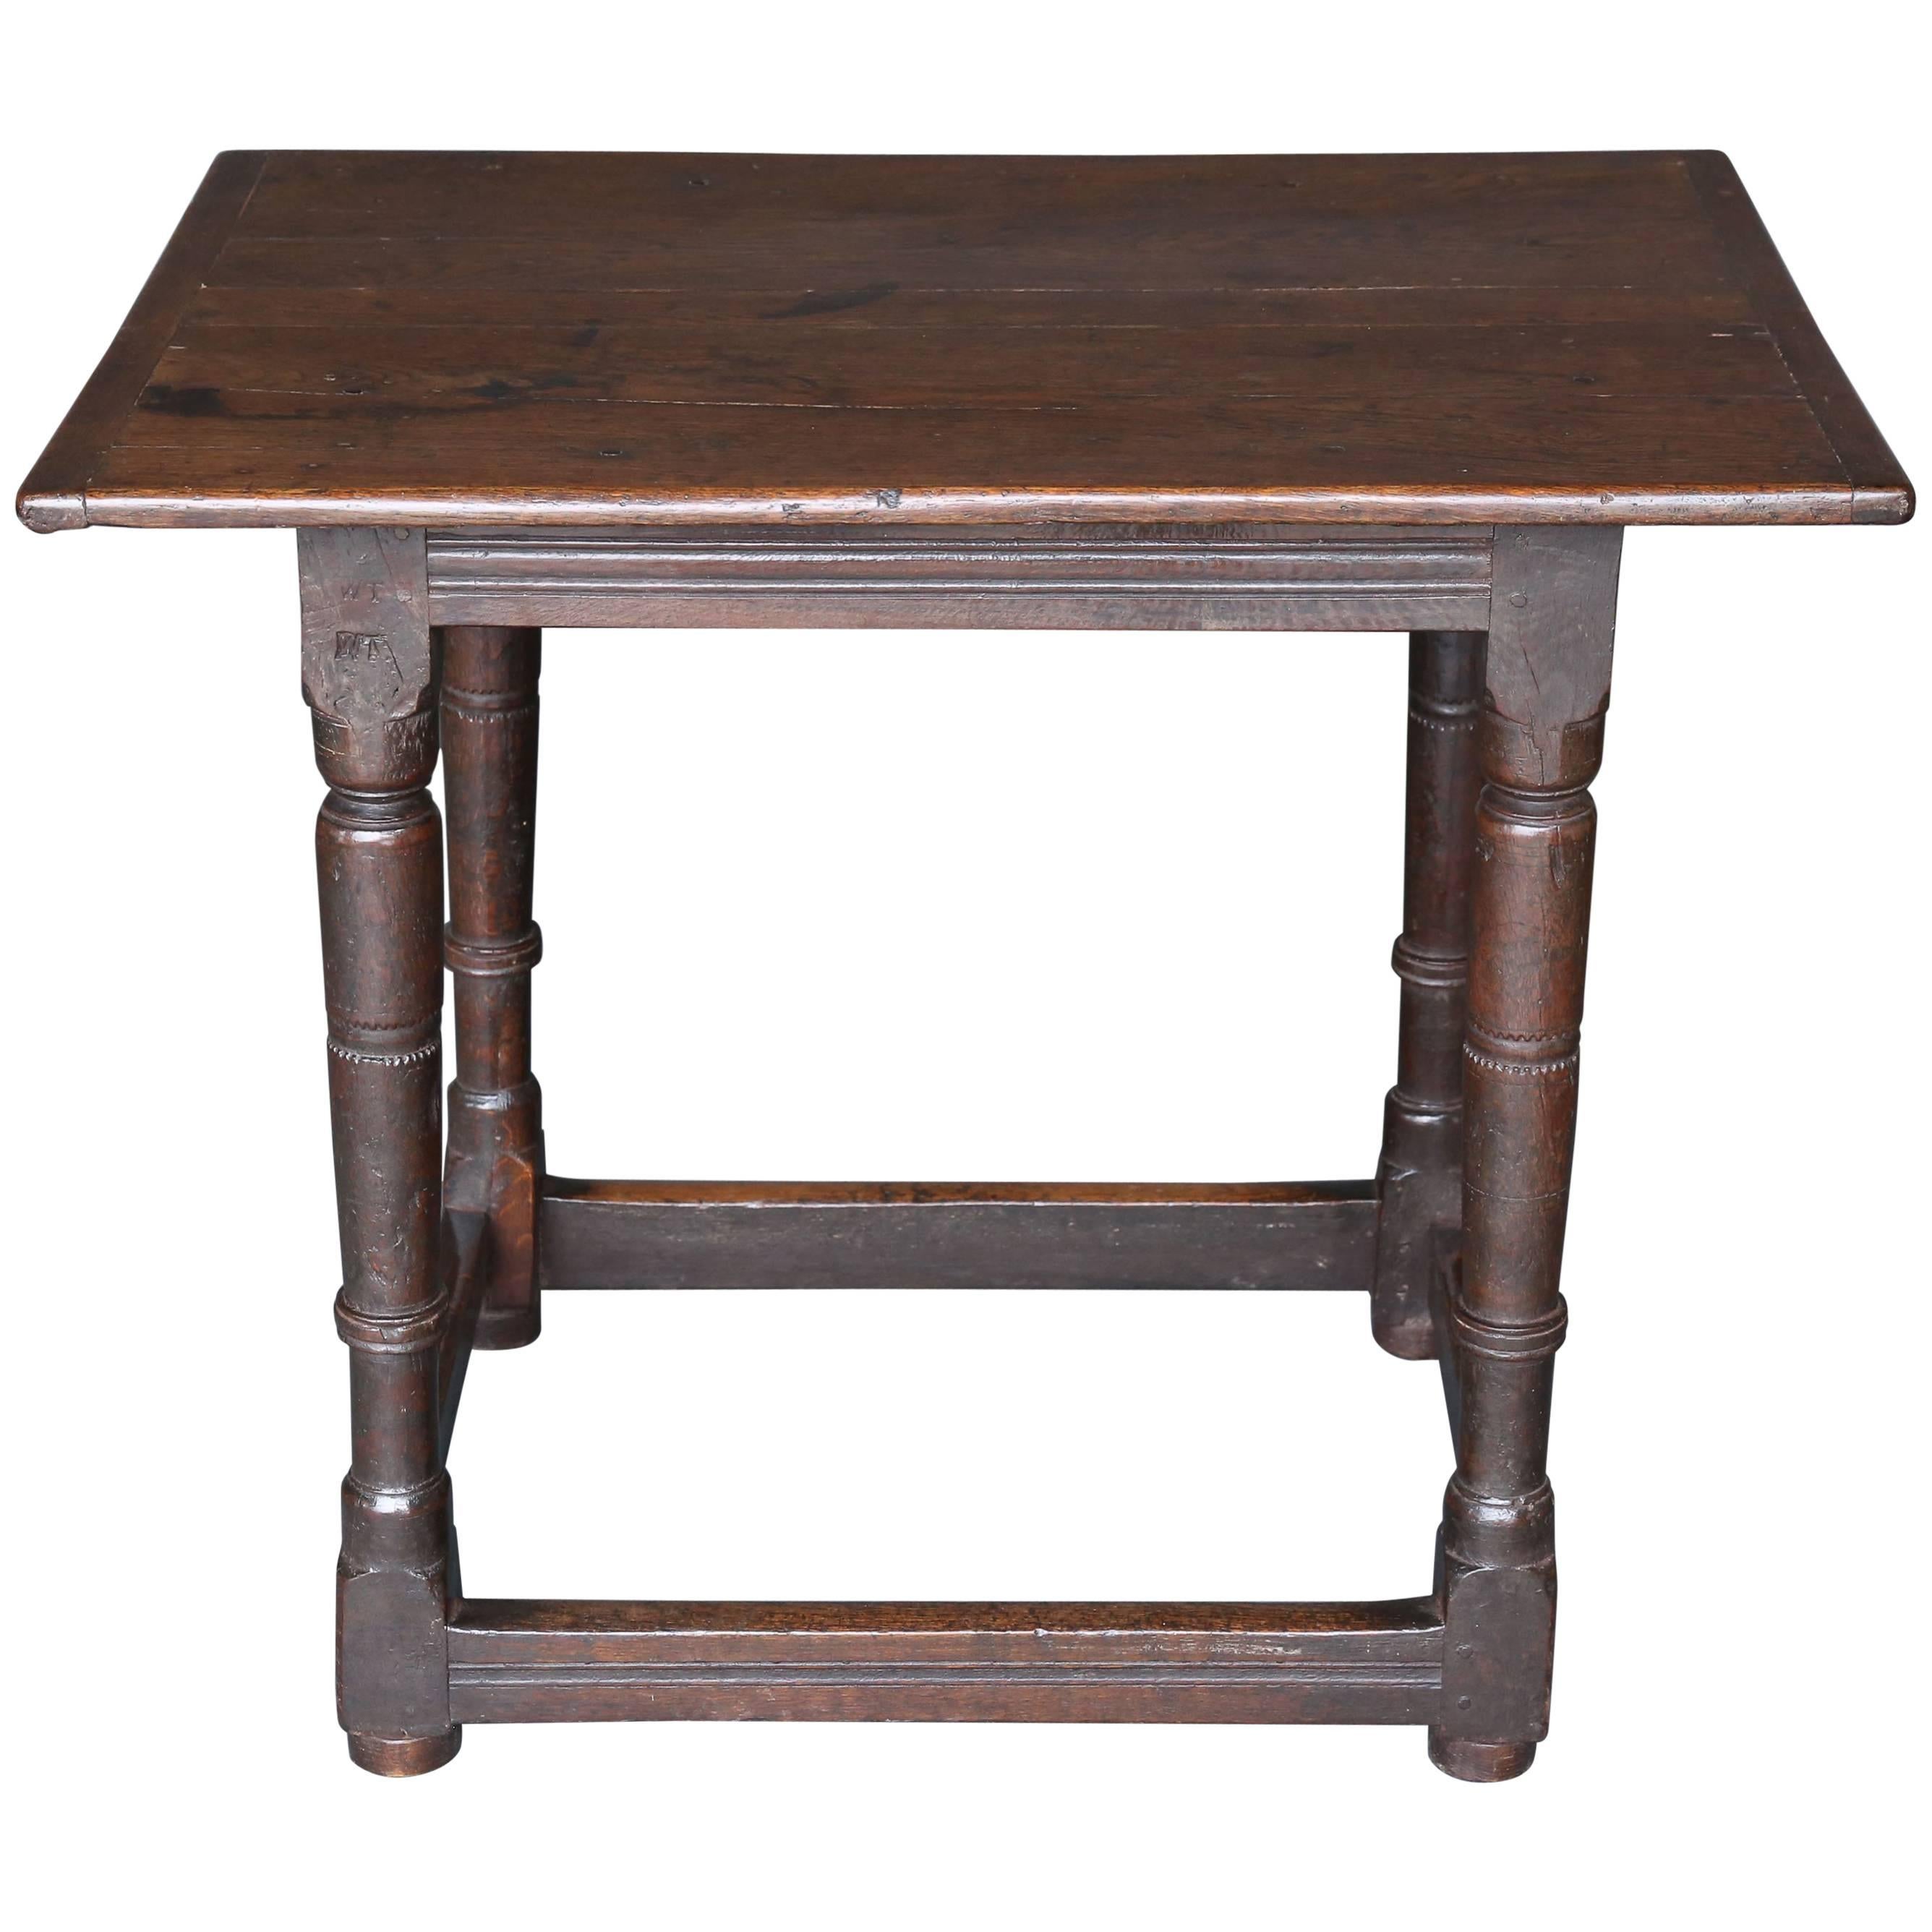 19th Century Small Side Table